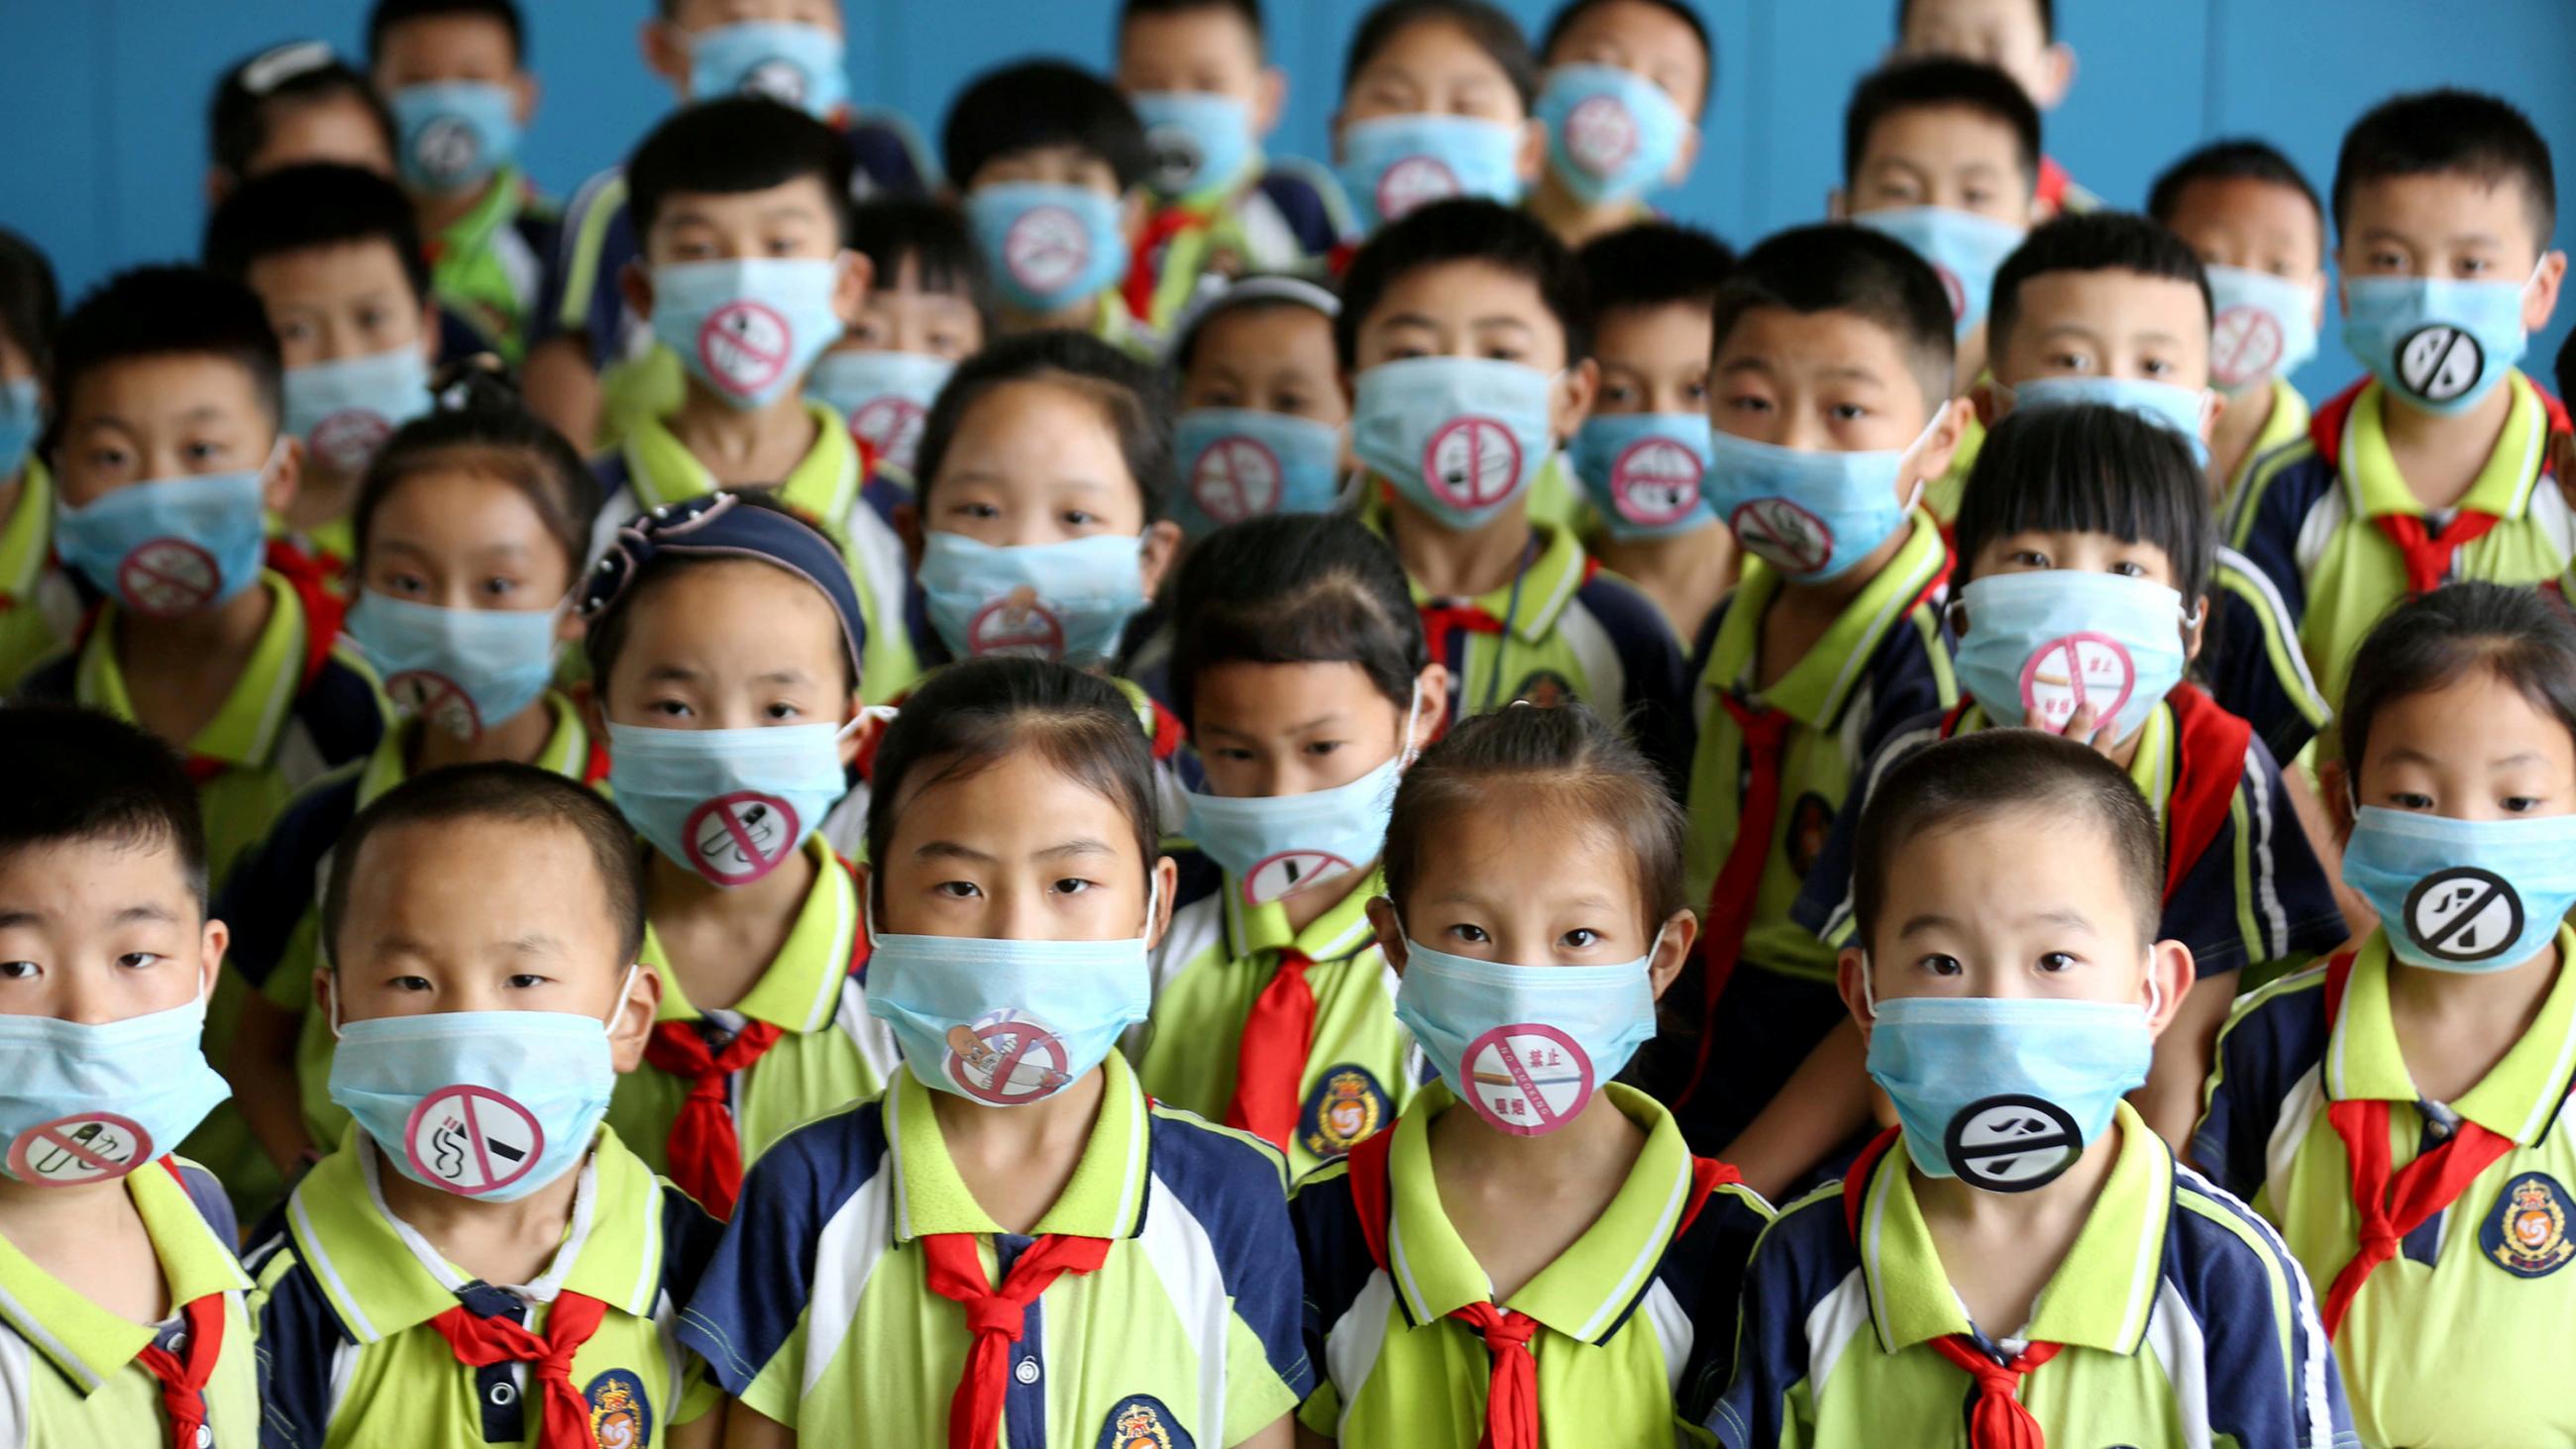 The photo shows a room full of children in school uniforms and no-smoking masks. 